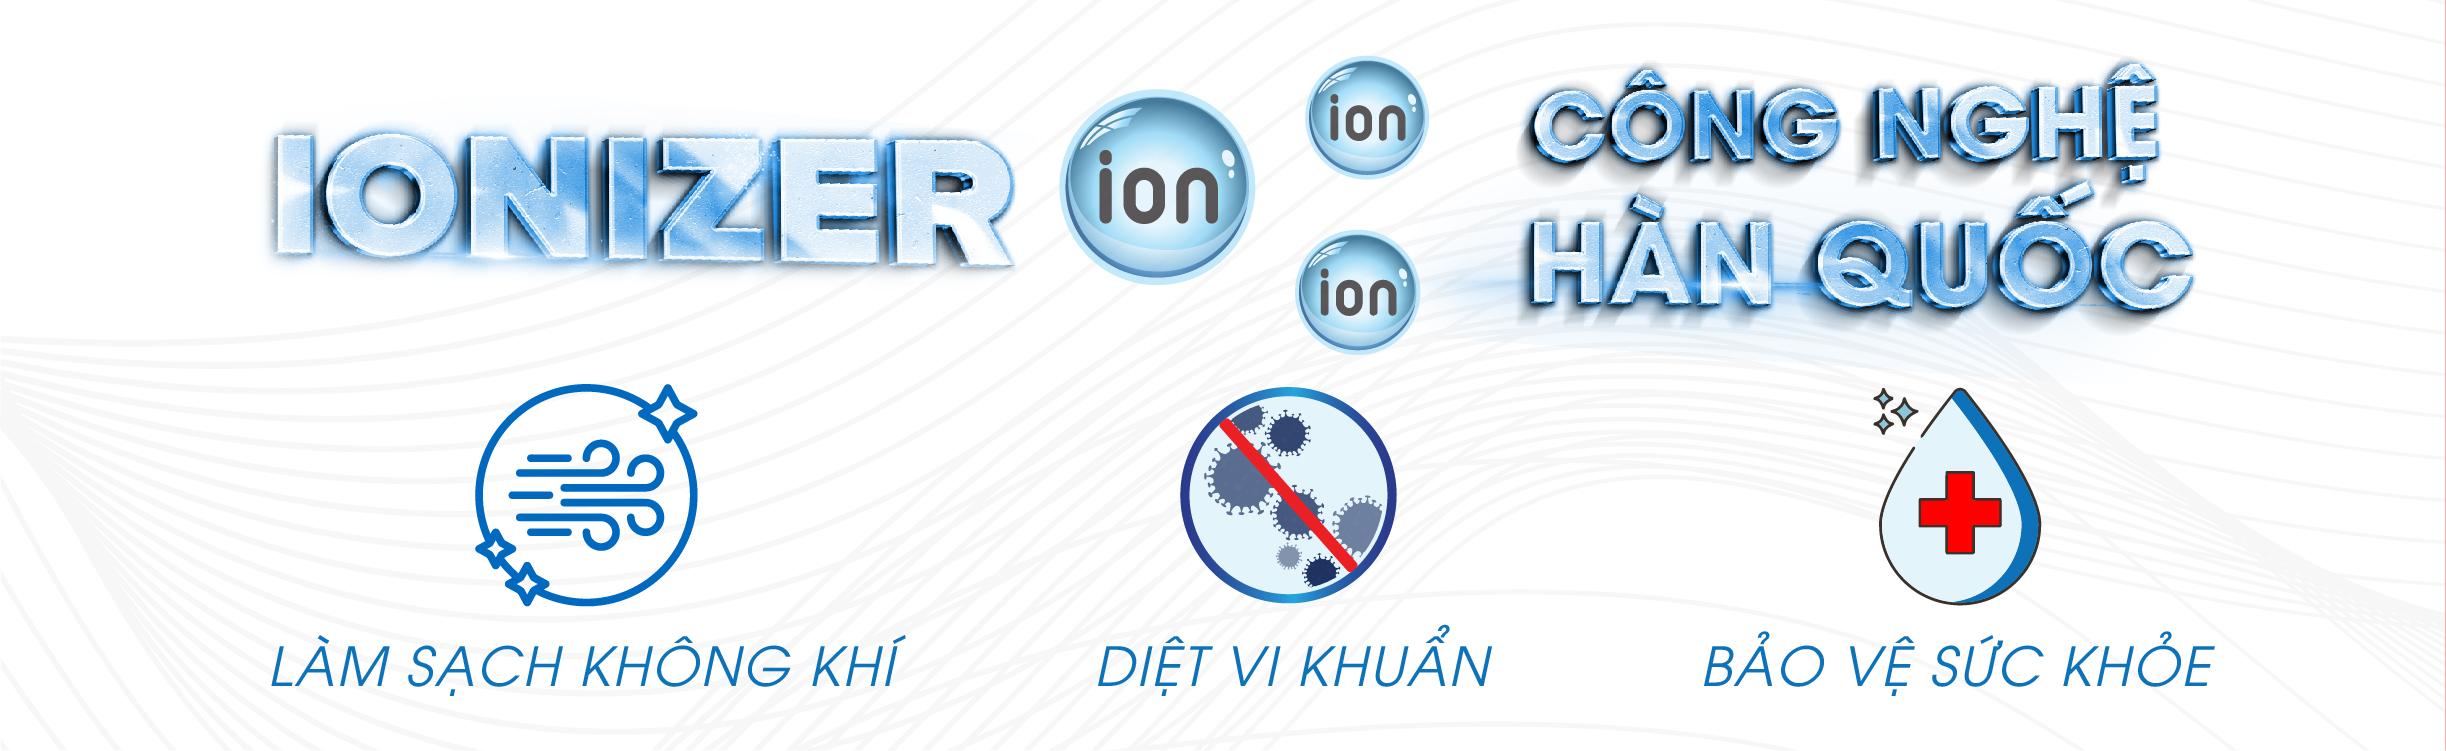 ionizer cong nghe han quoc 1